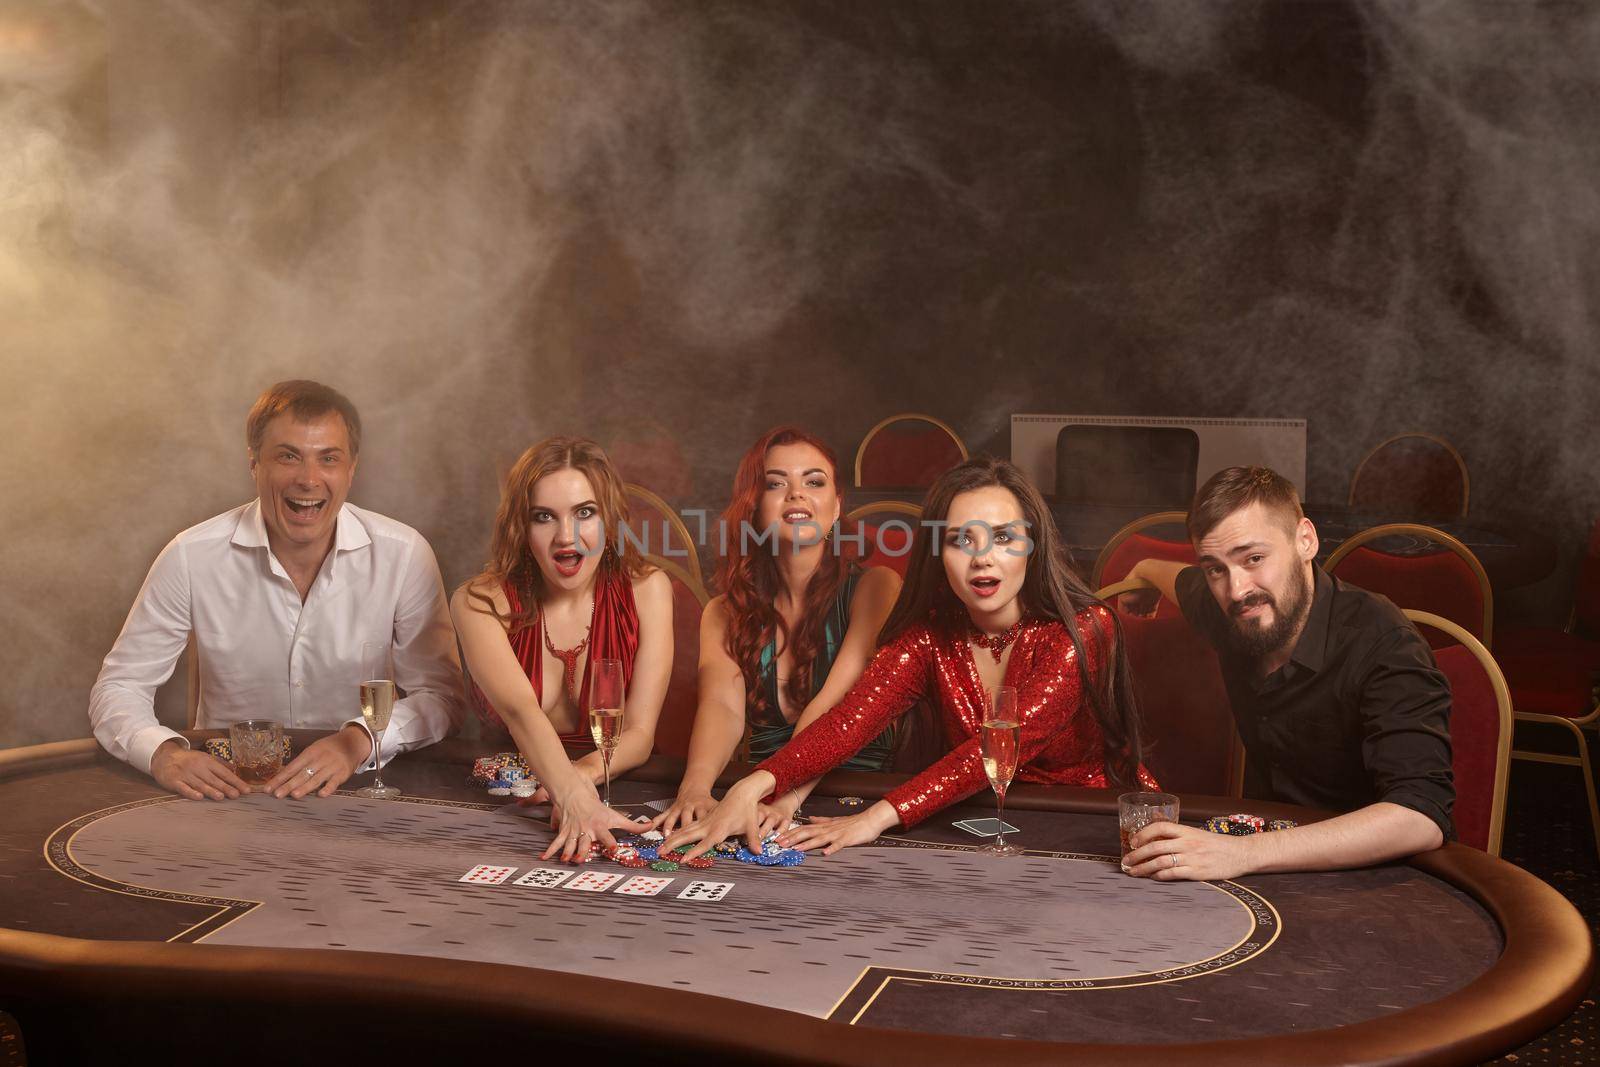 Cheerful colleagues are playing poker at casino. They are celebrating their win, smiling and looking vey excited while posing at the table against a dark smoke background in a ray of a spotlight. Cards, chips, money, alcohol, gambling, entertainment concept.